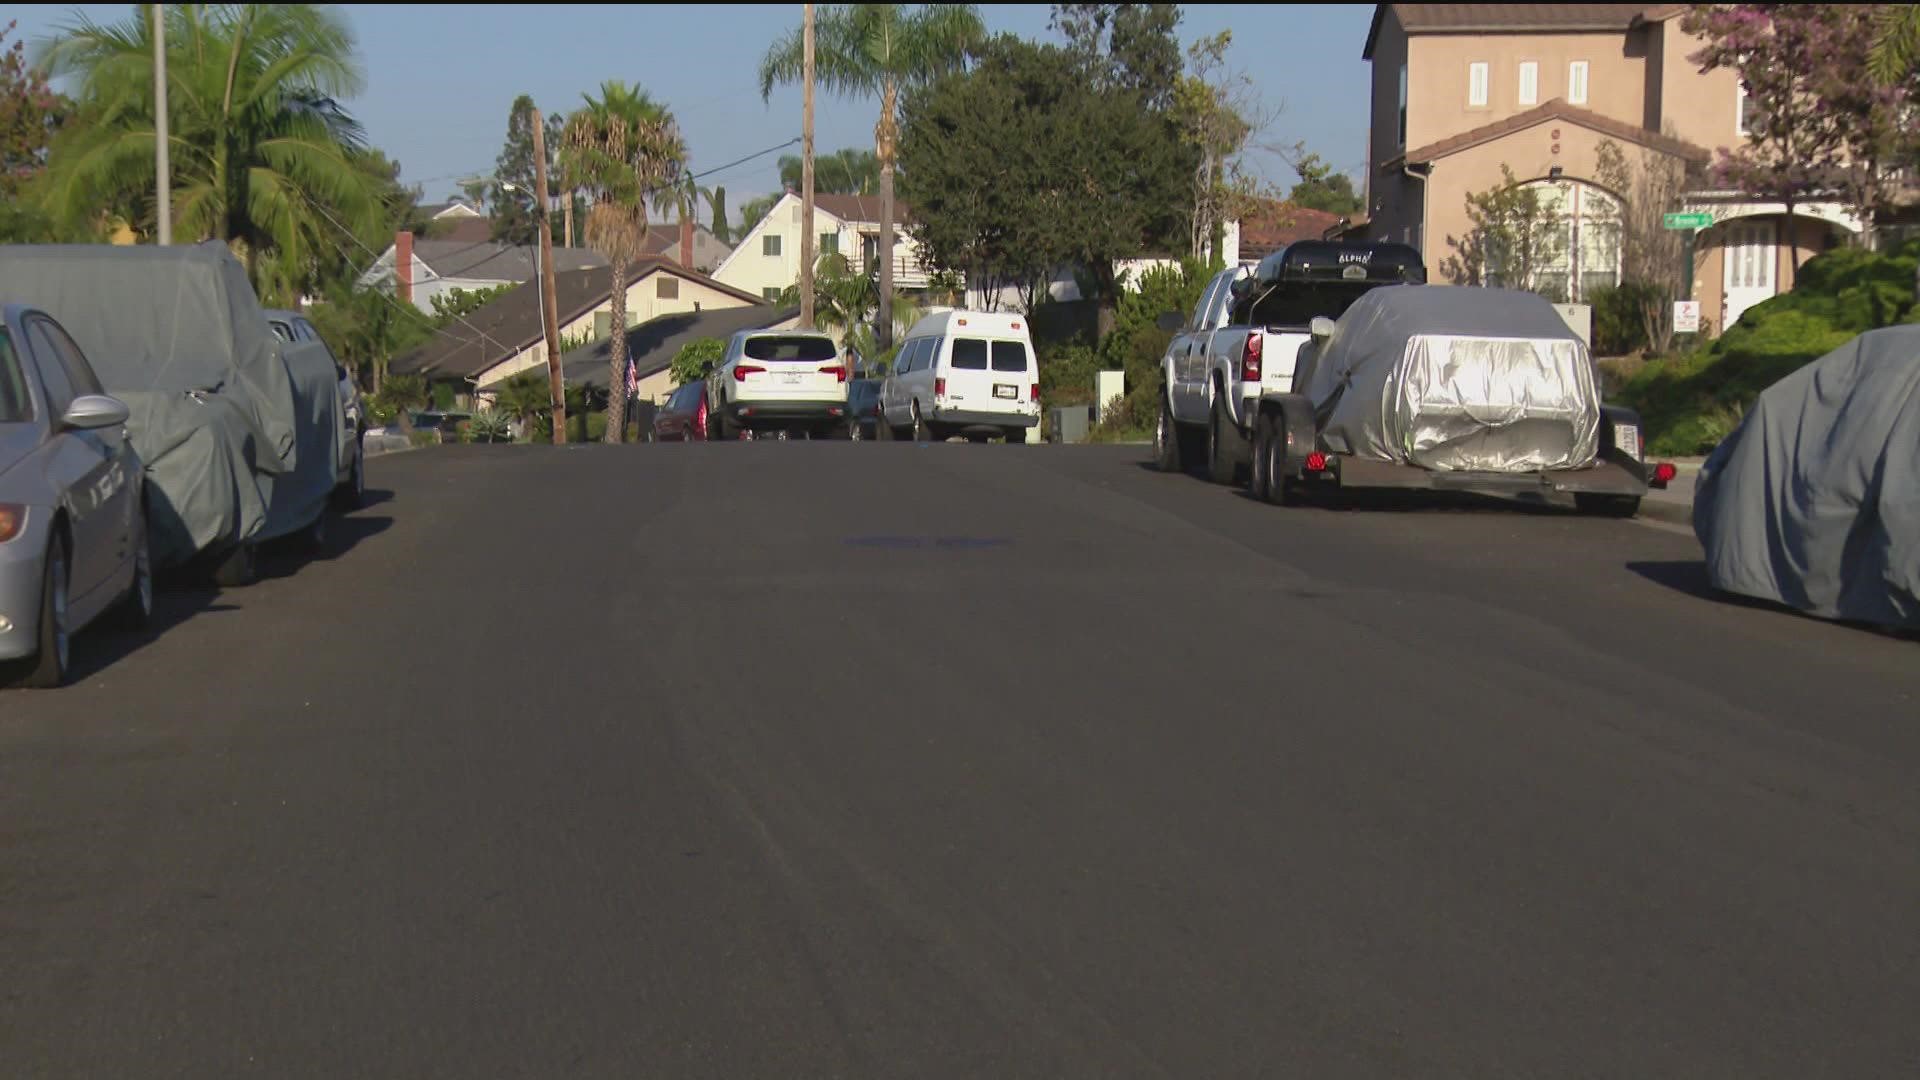 CBS 8 brought a La Mesa residents concerns to the police and found out if anything can be done for a row of cars parked on the street for months.